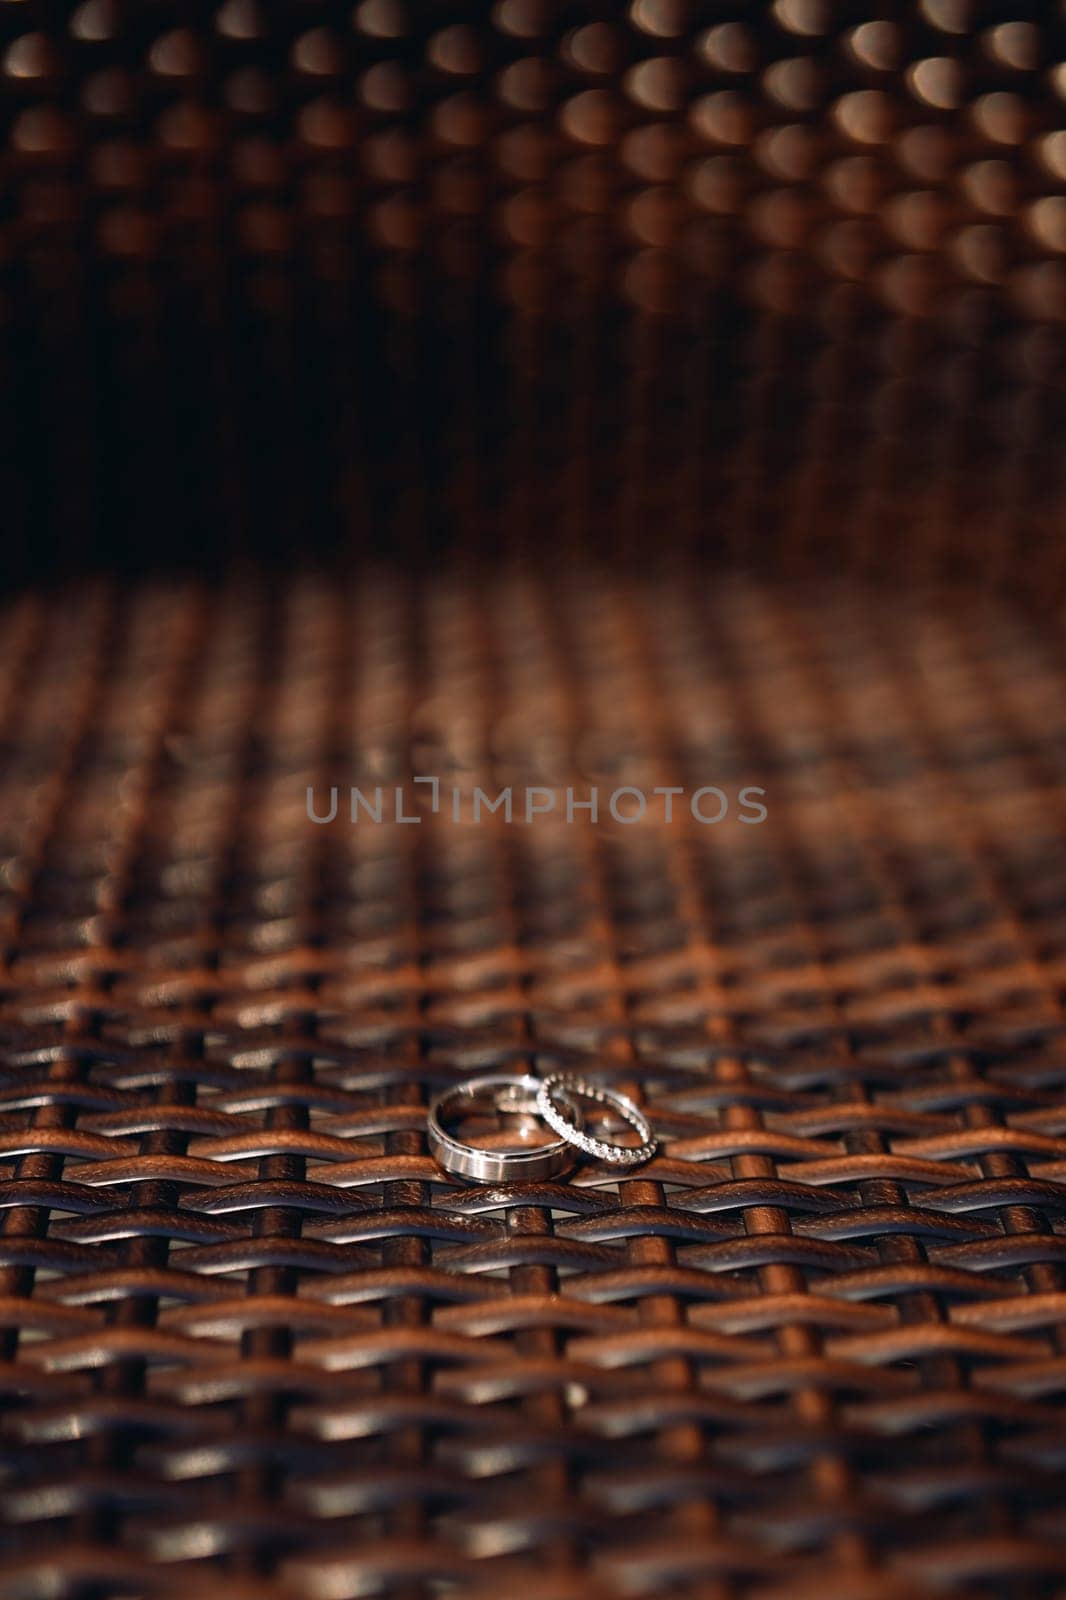 Wedding rings lie on a brown wicker chair. High quality photo